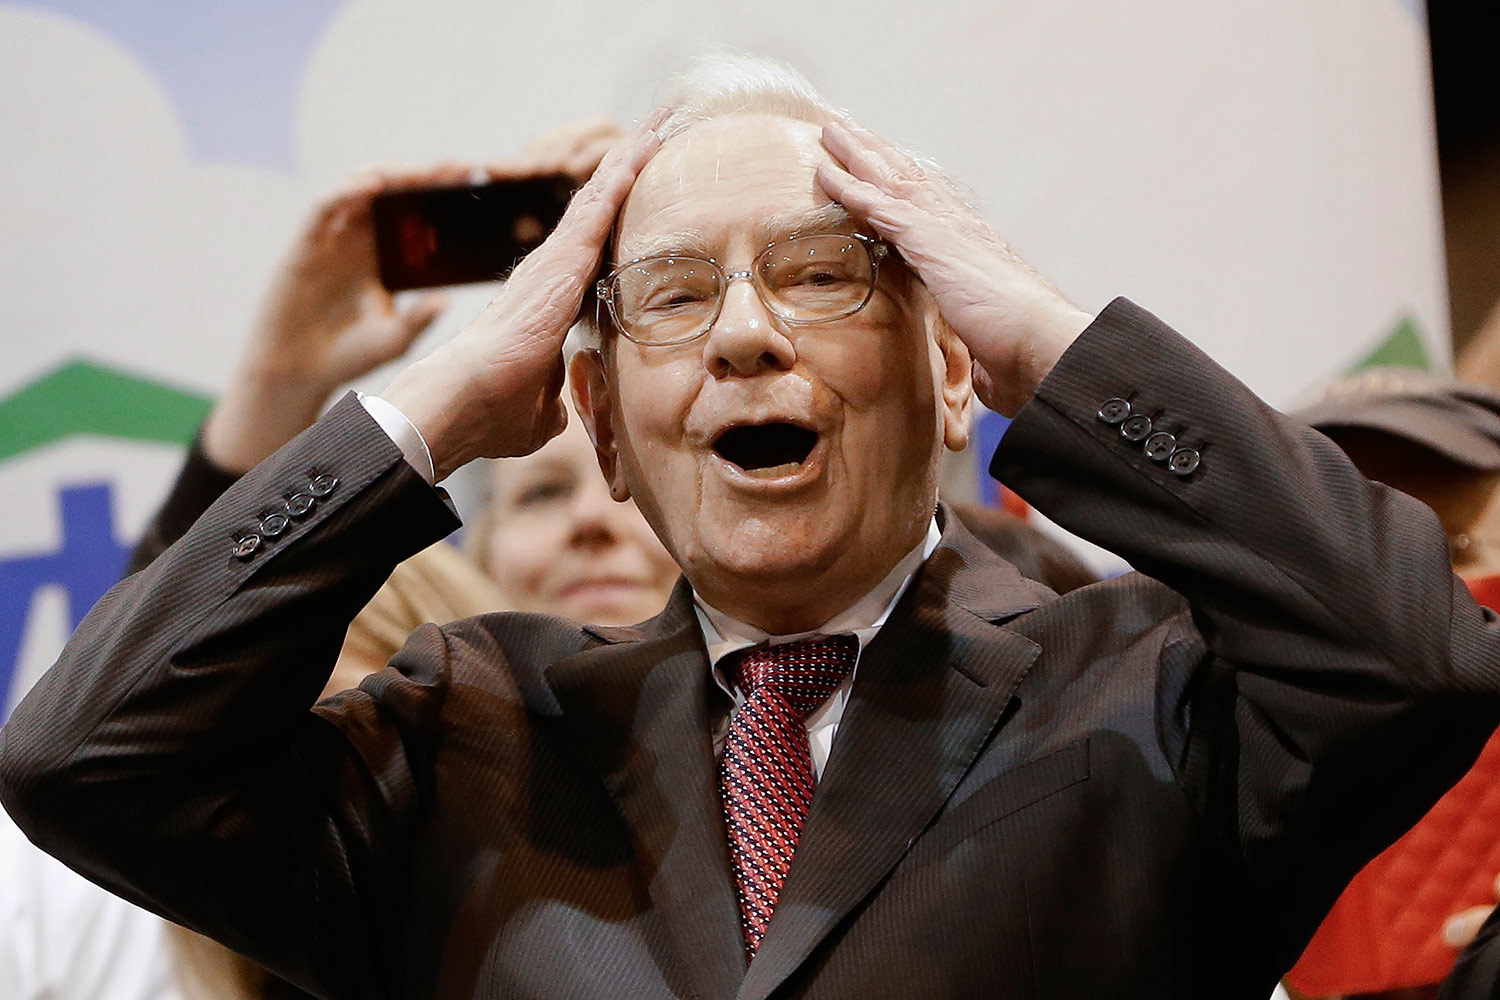 The shares of Apple reached a record level due to Warren Buffett